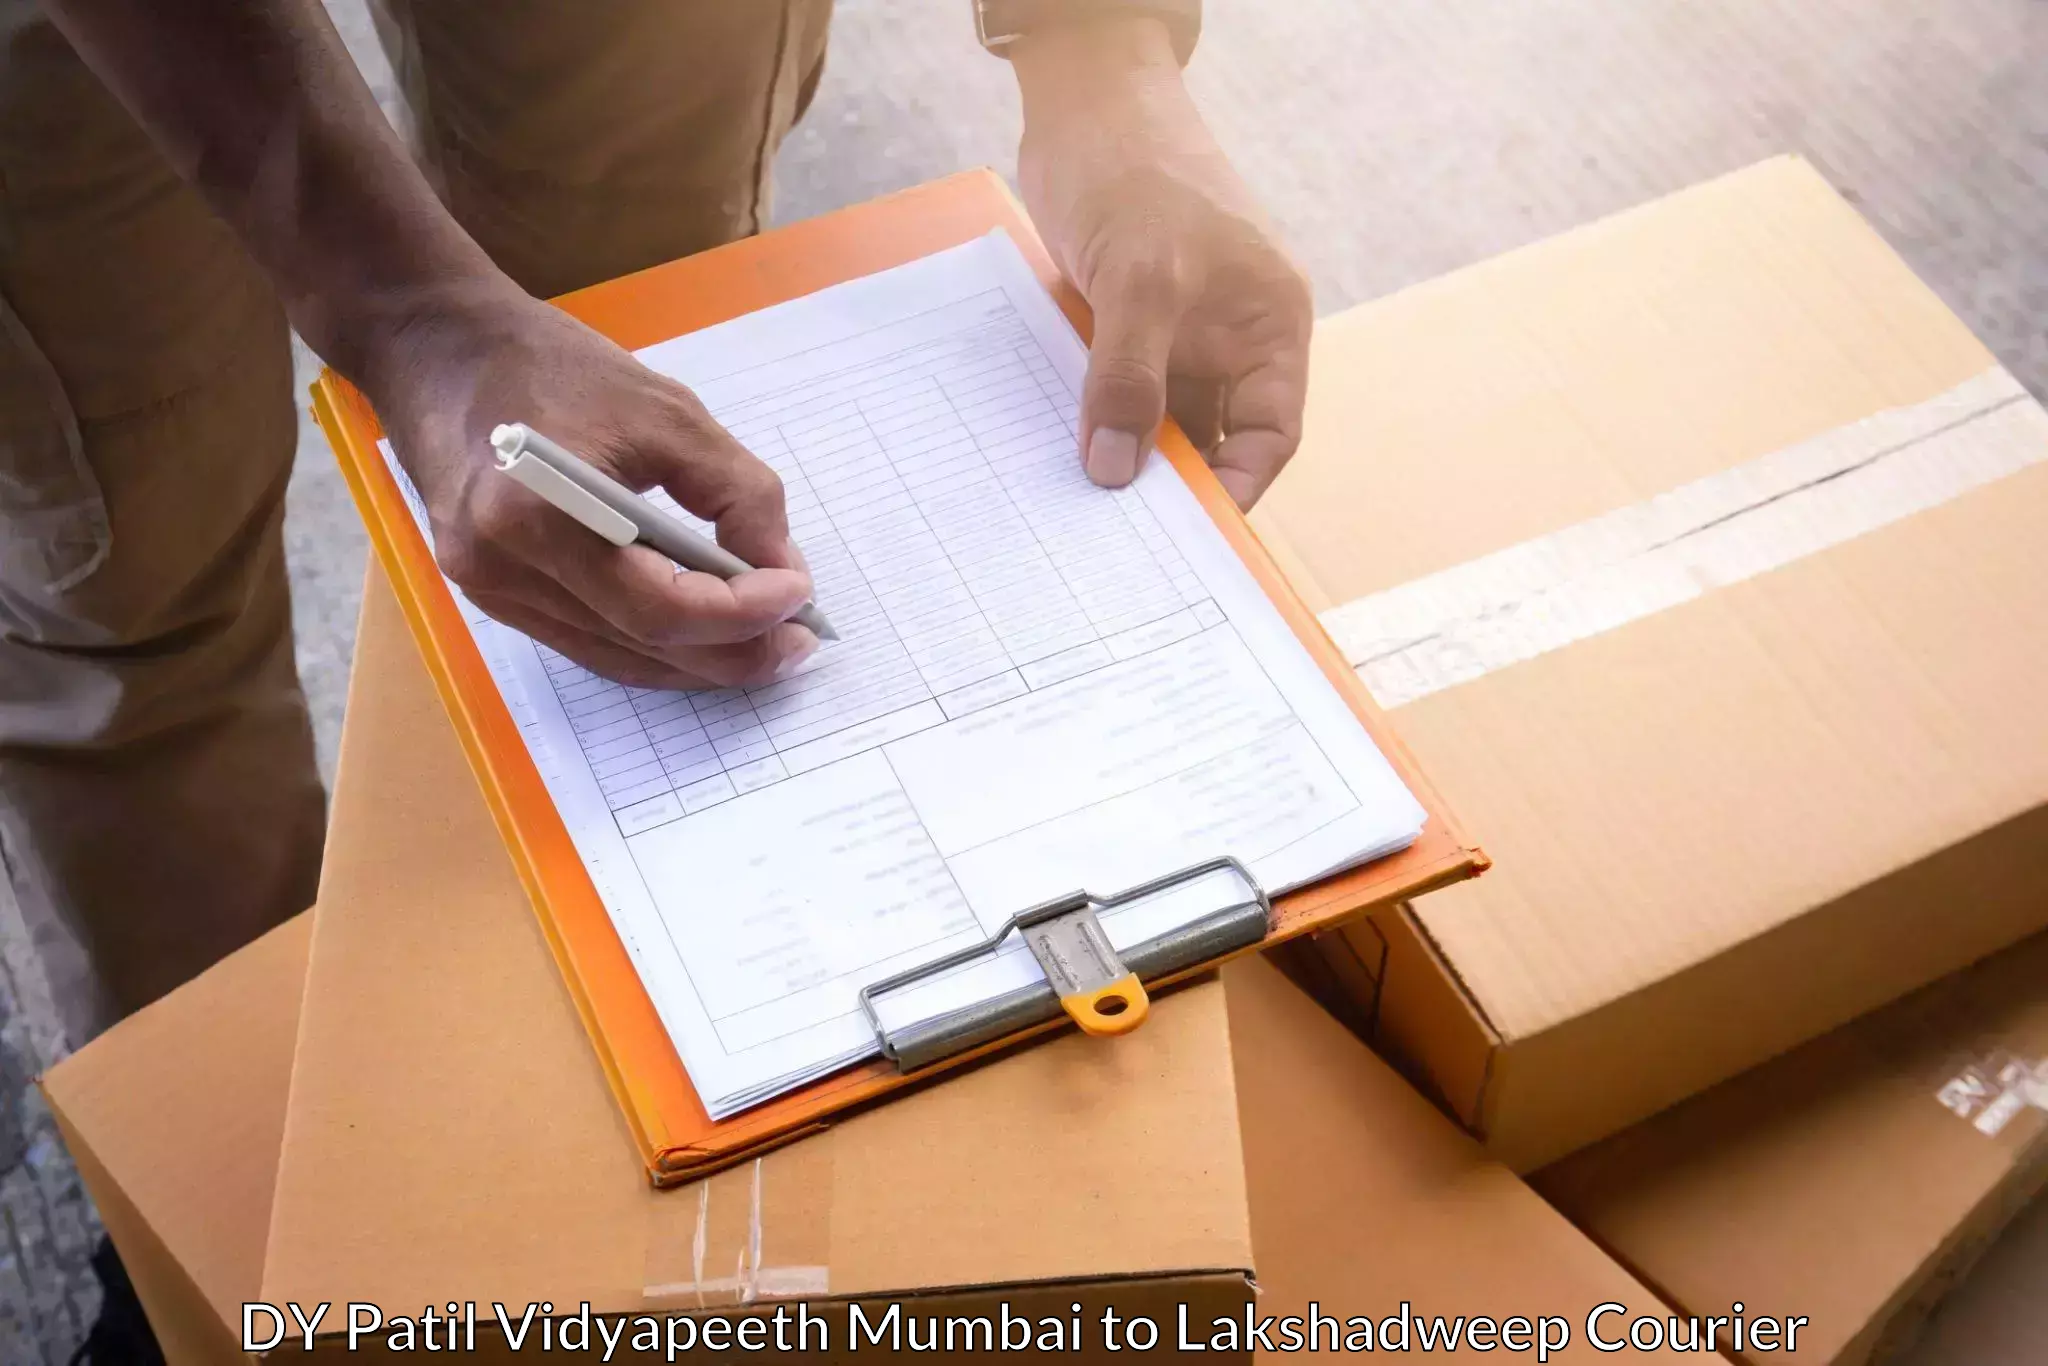 Nationwide delivery network DY Patil Vidyapeeth Mumbai to Lakshadweep